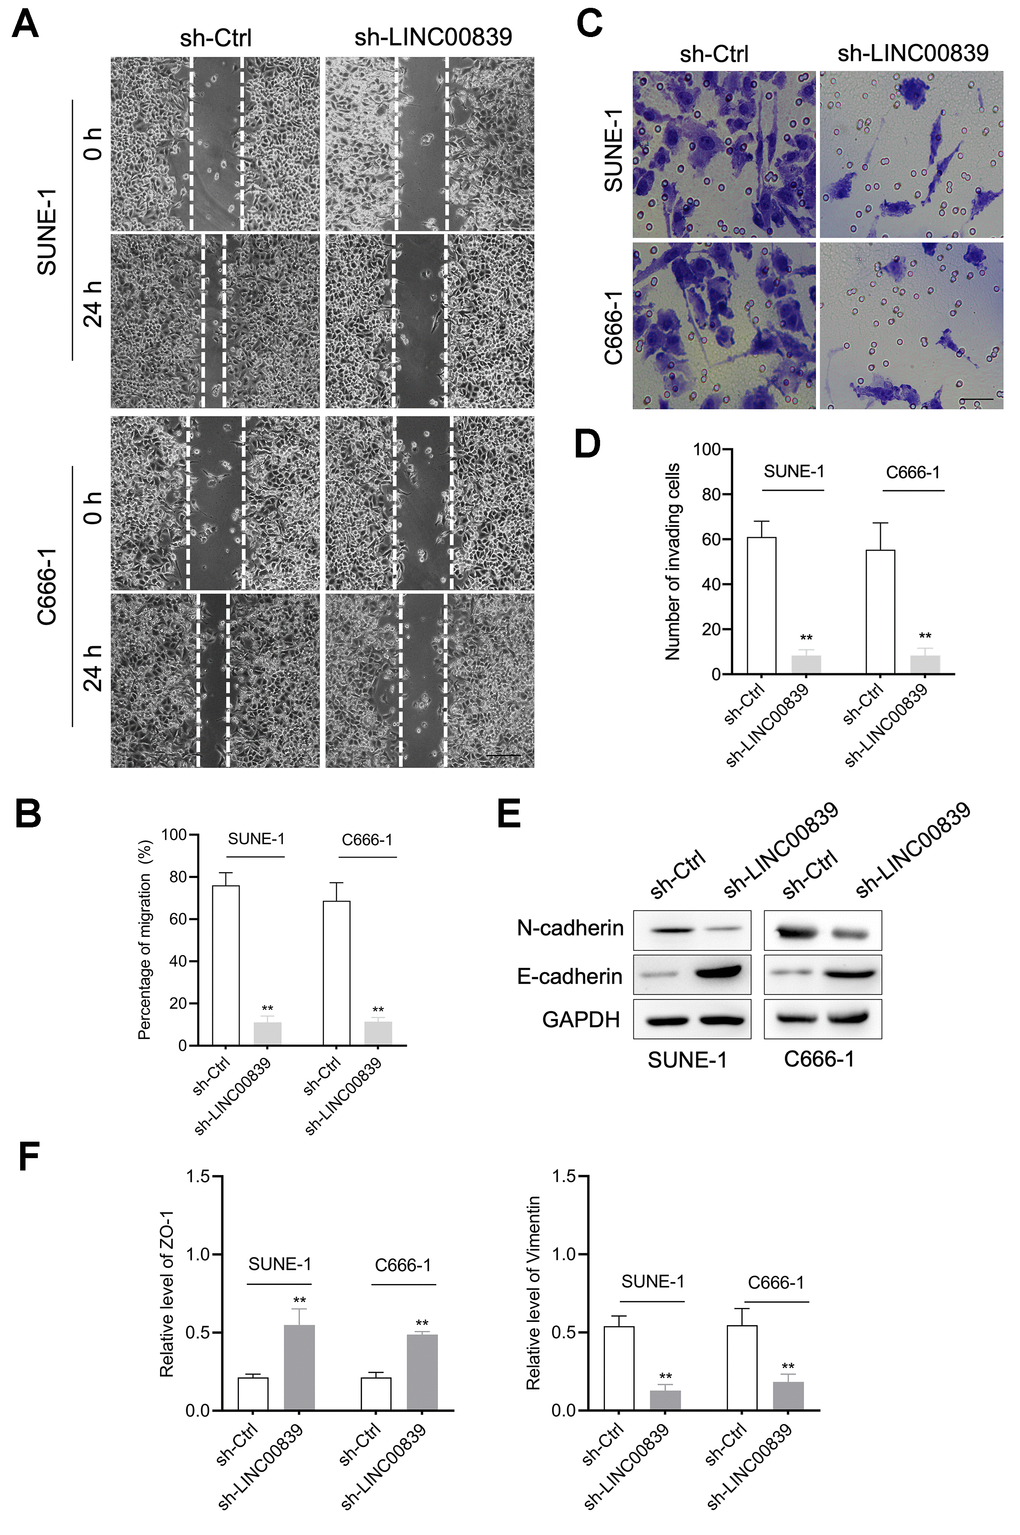 The role of LINC00839 in NPC cell migration and invasion. (A, B) After cell transfected with sh-LINC00839, cell migration was determined by wound healing assay. (C, D) Cell invasion was determined by Transwell assay. (E) The expressions of E-cadherin and N-cadherin were determined by western blot. (F) The mRNA levels of Vimentin and ZO-1 were measured by qPCR assay. **P 